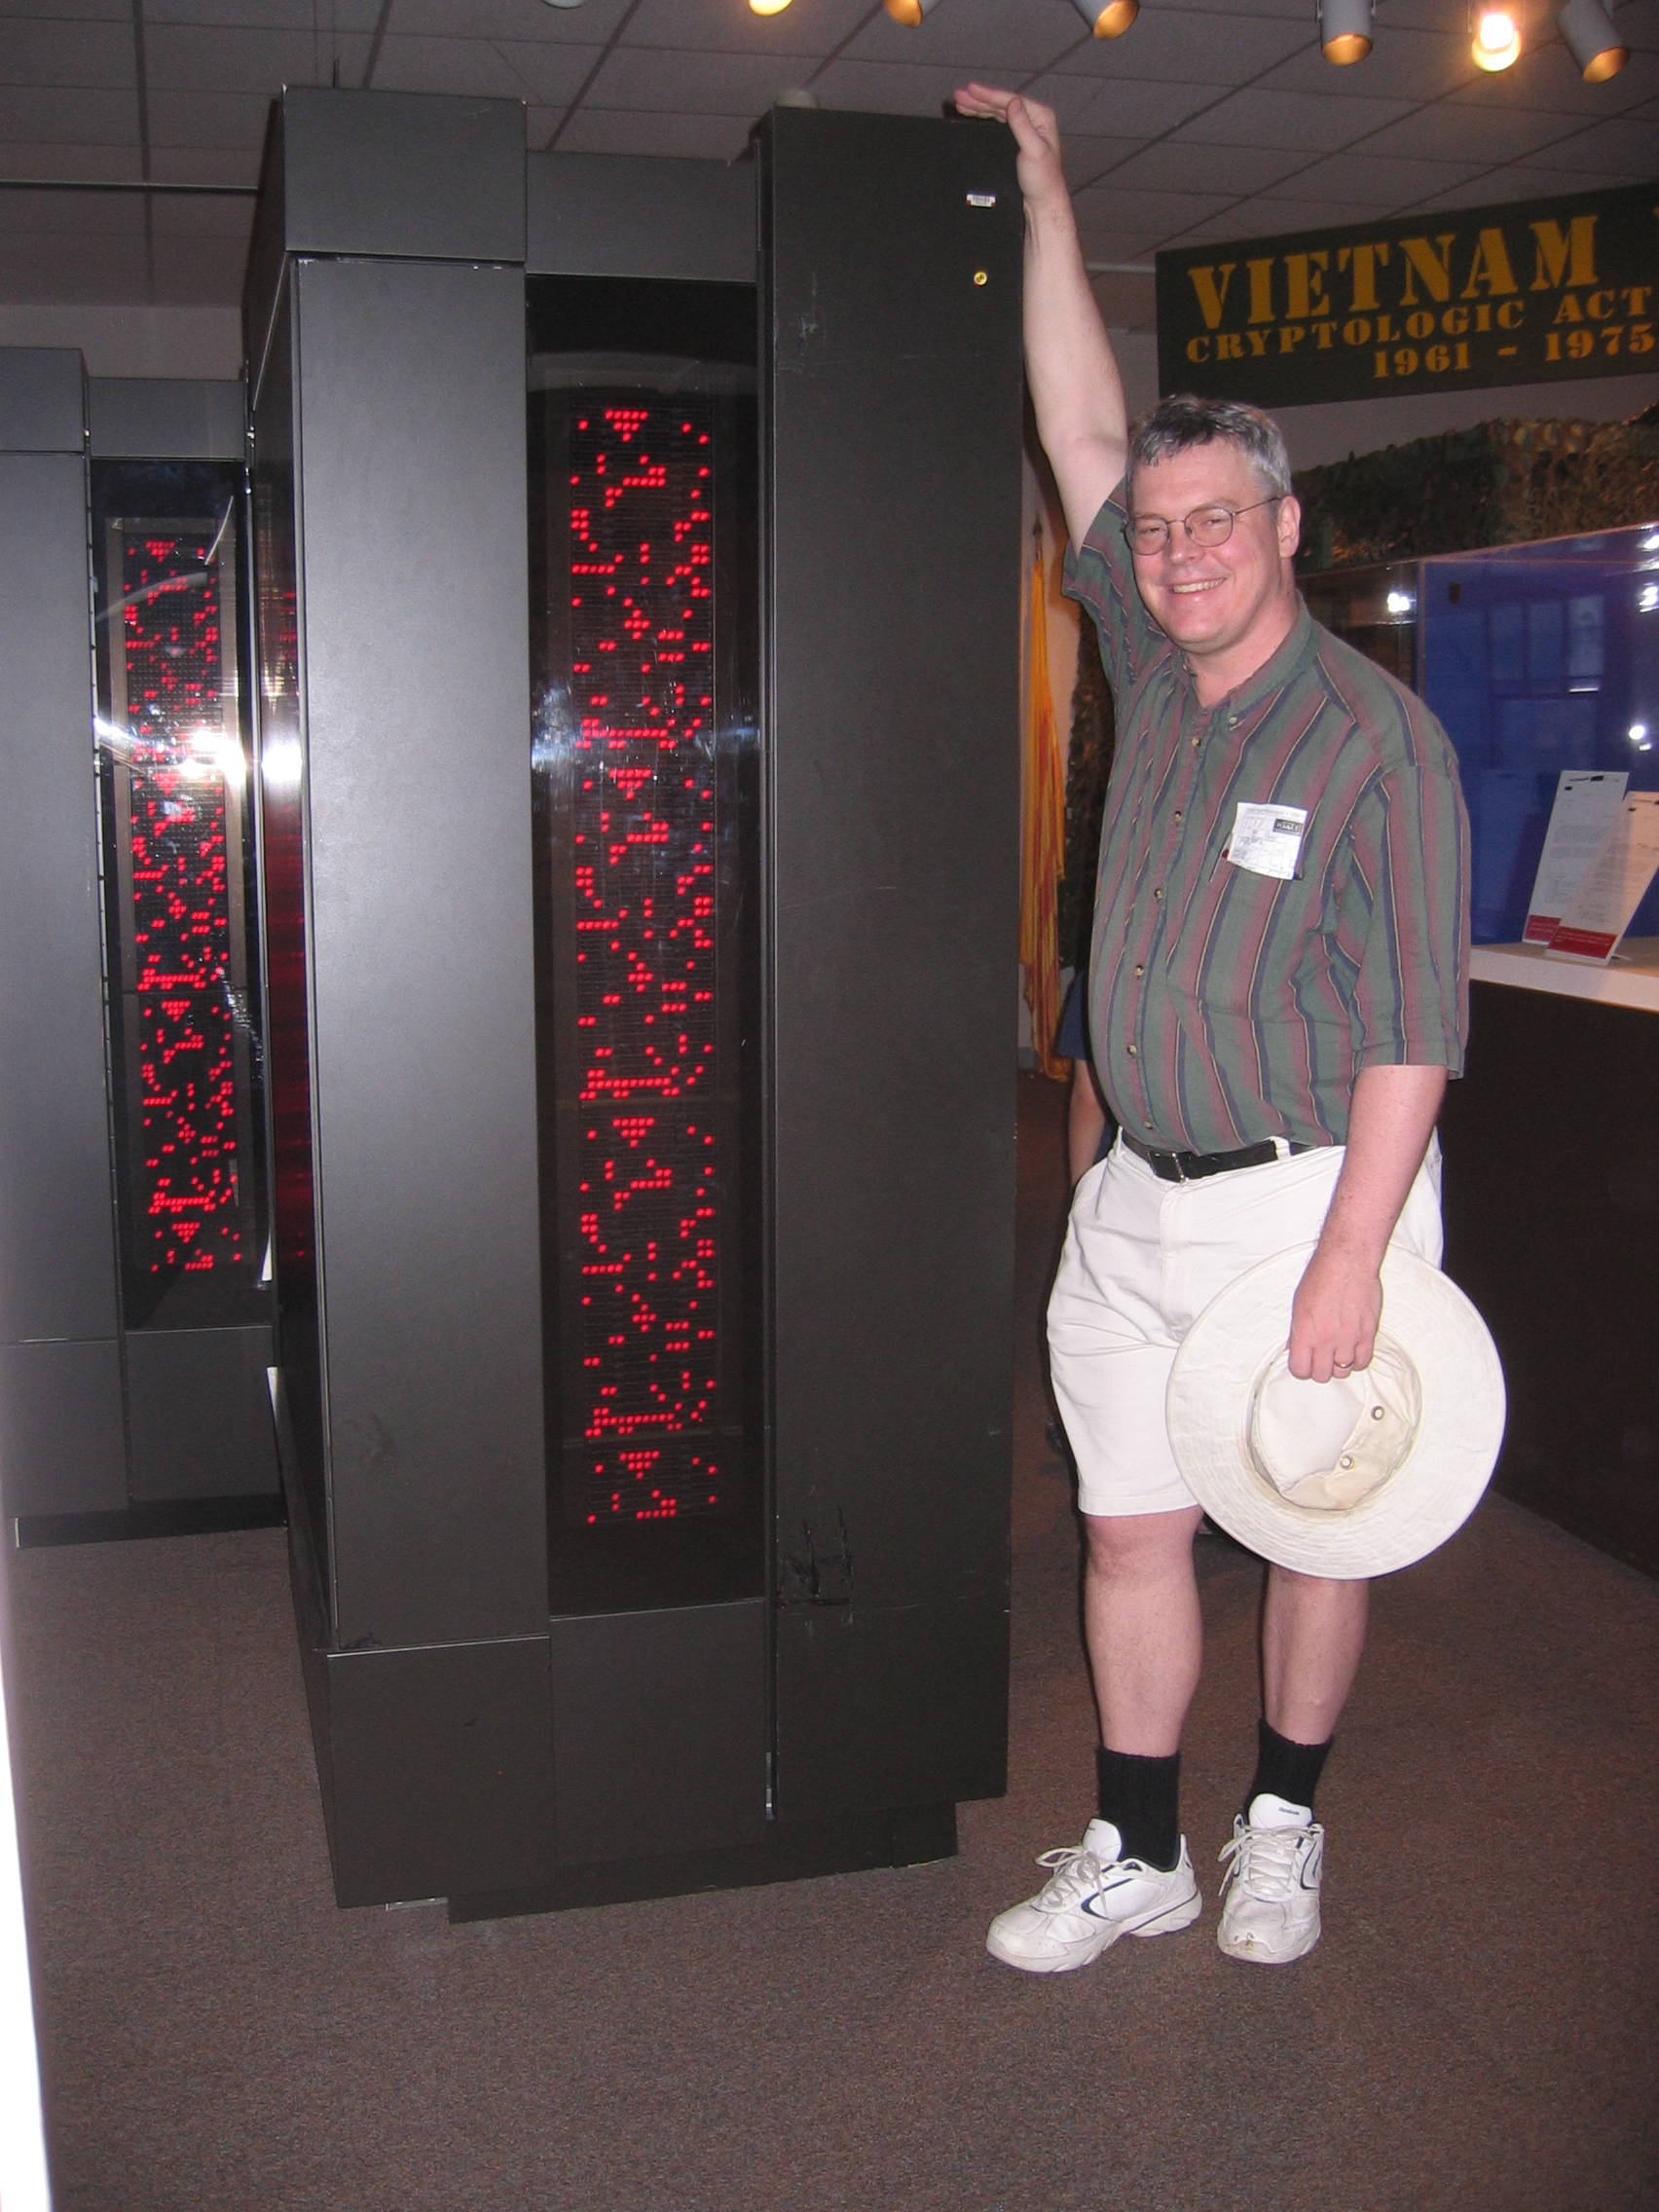 Bradley in front of the CM-5 at the National Cryptologic Museum